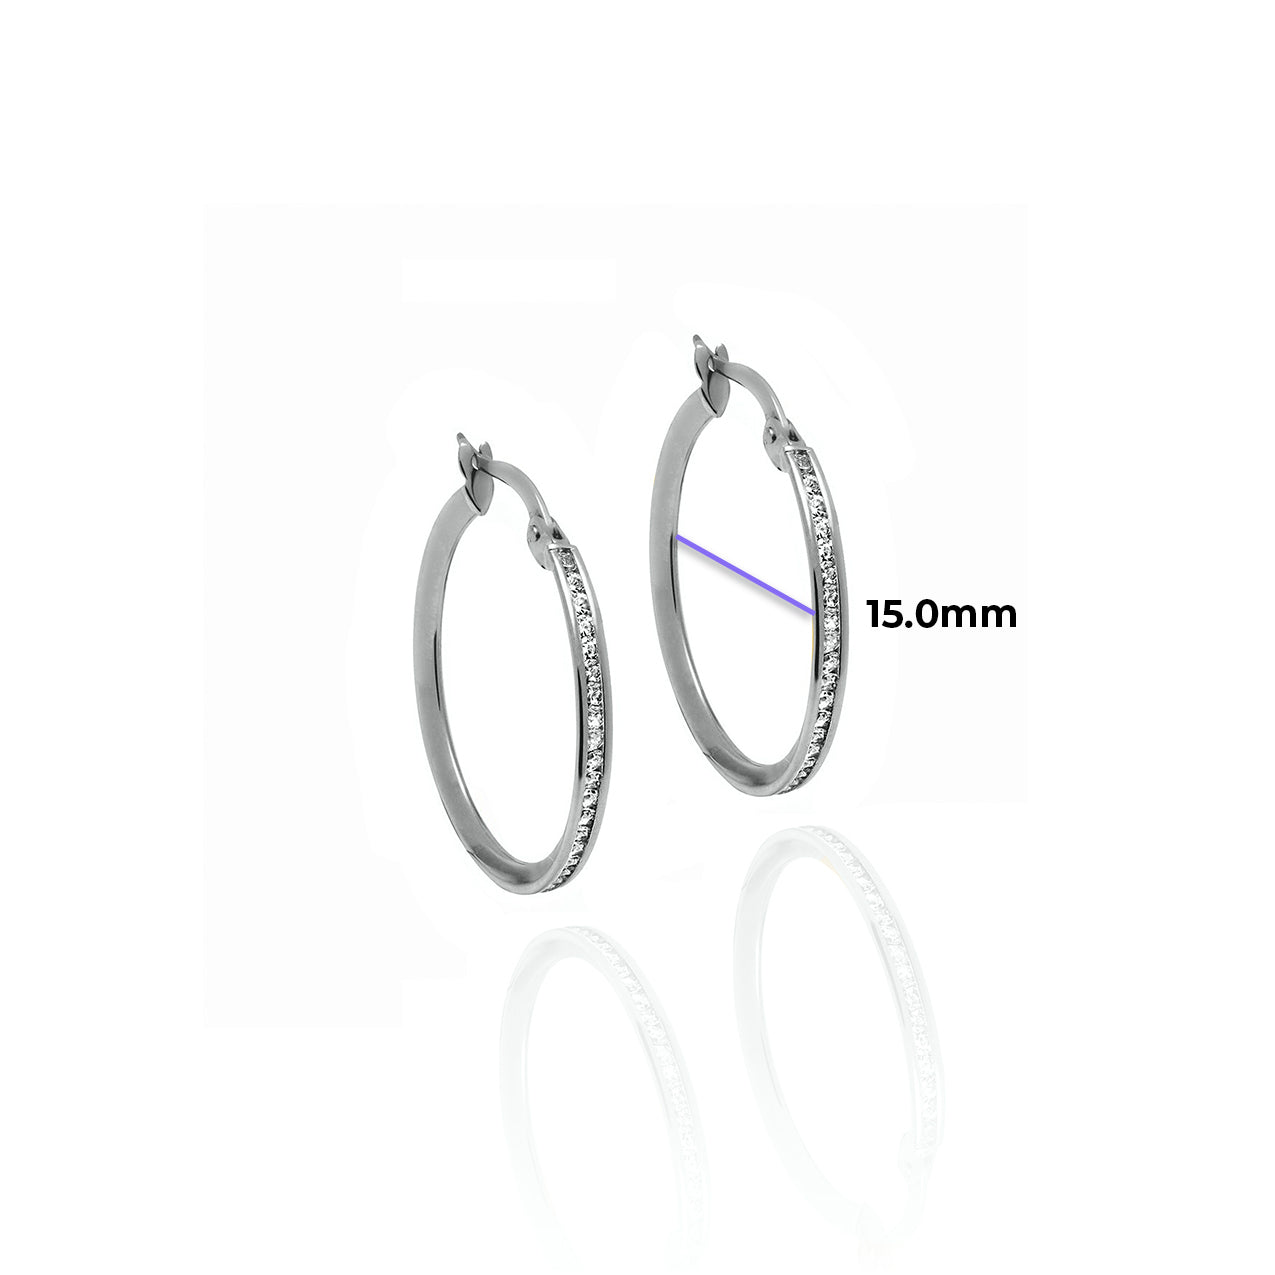 Medium Crystal Hoops 2mm Width Solid Gold with Cubic Zirconia White with Measurement 15mm